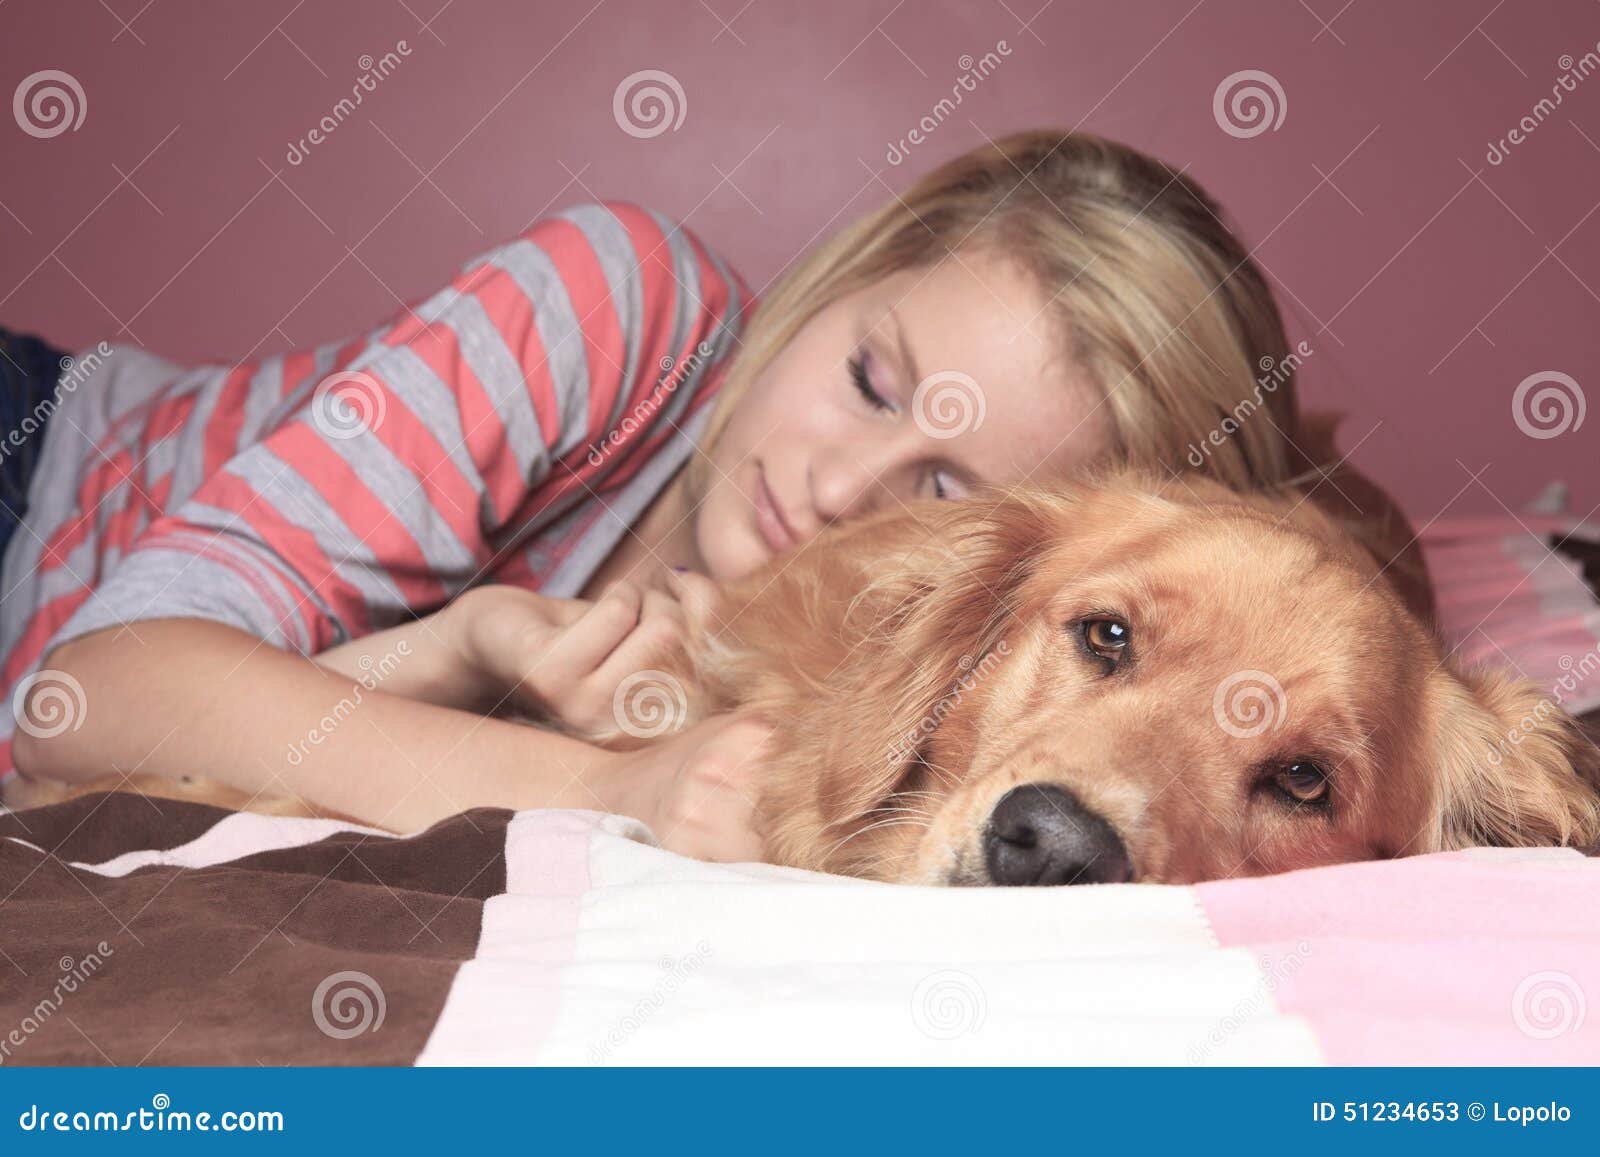 Girl And Her Dog Sleeping Together On A Bedroom Stock Image